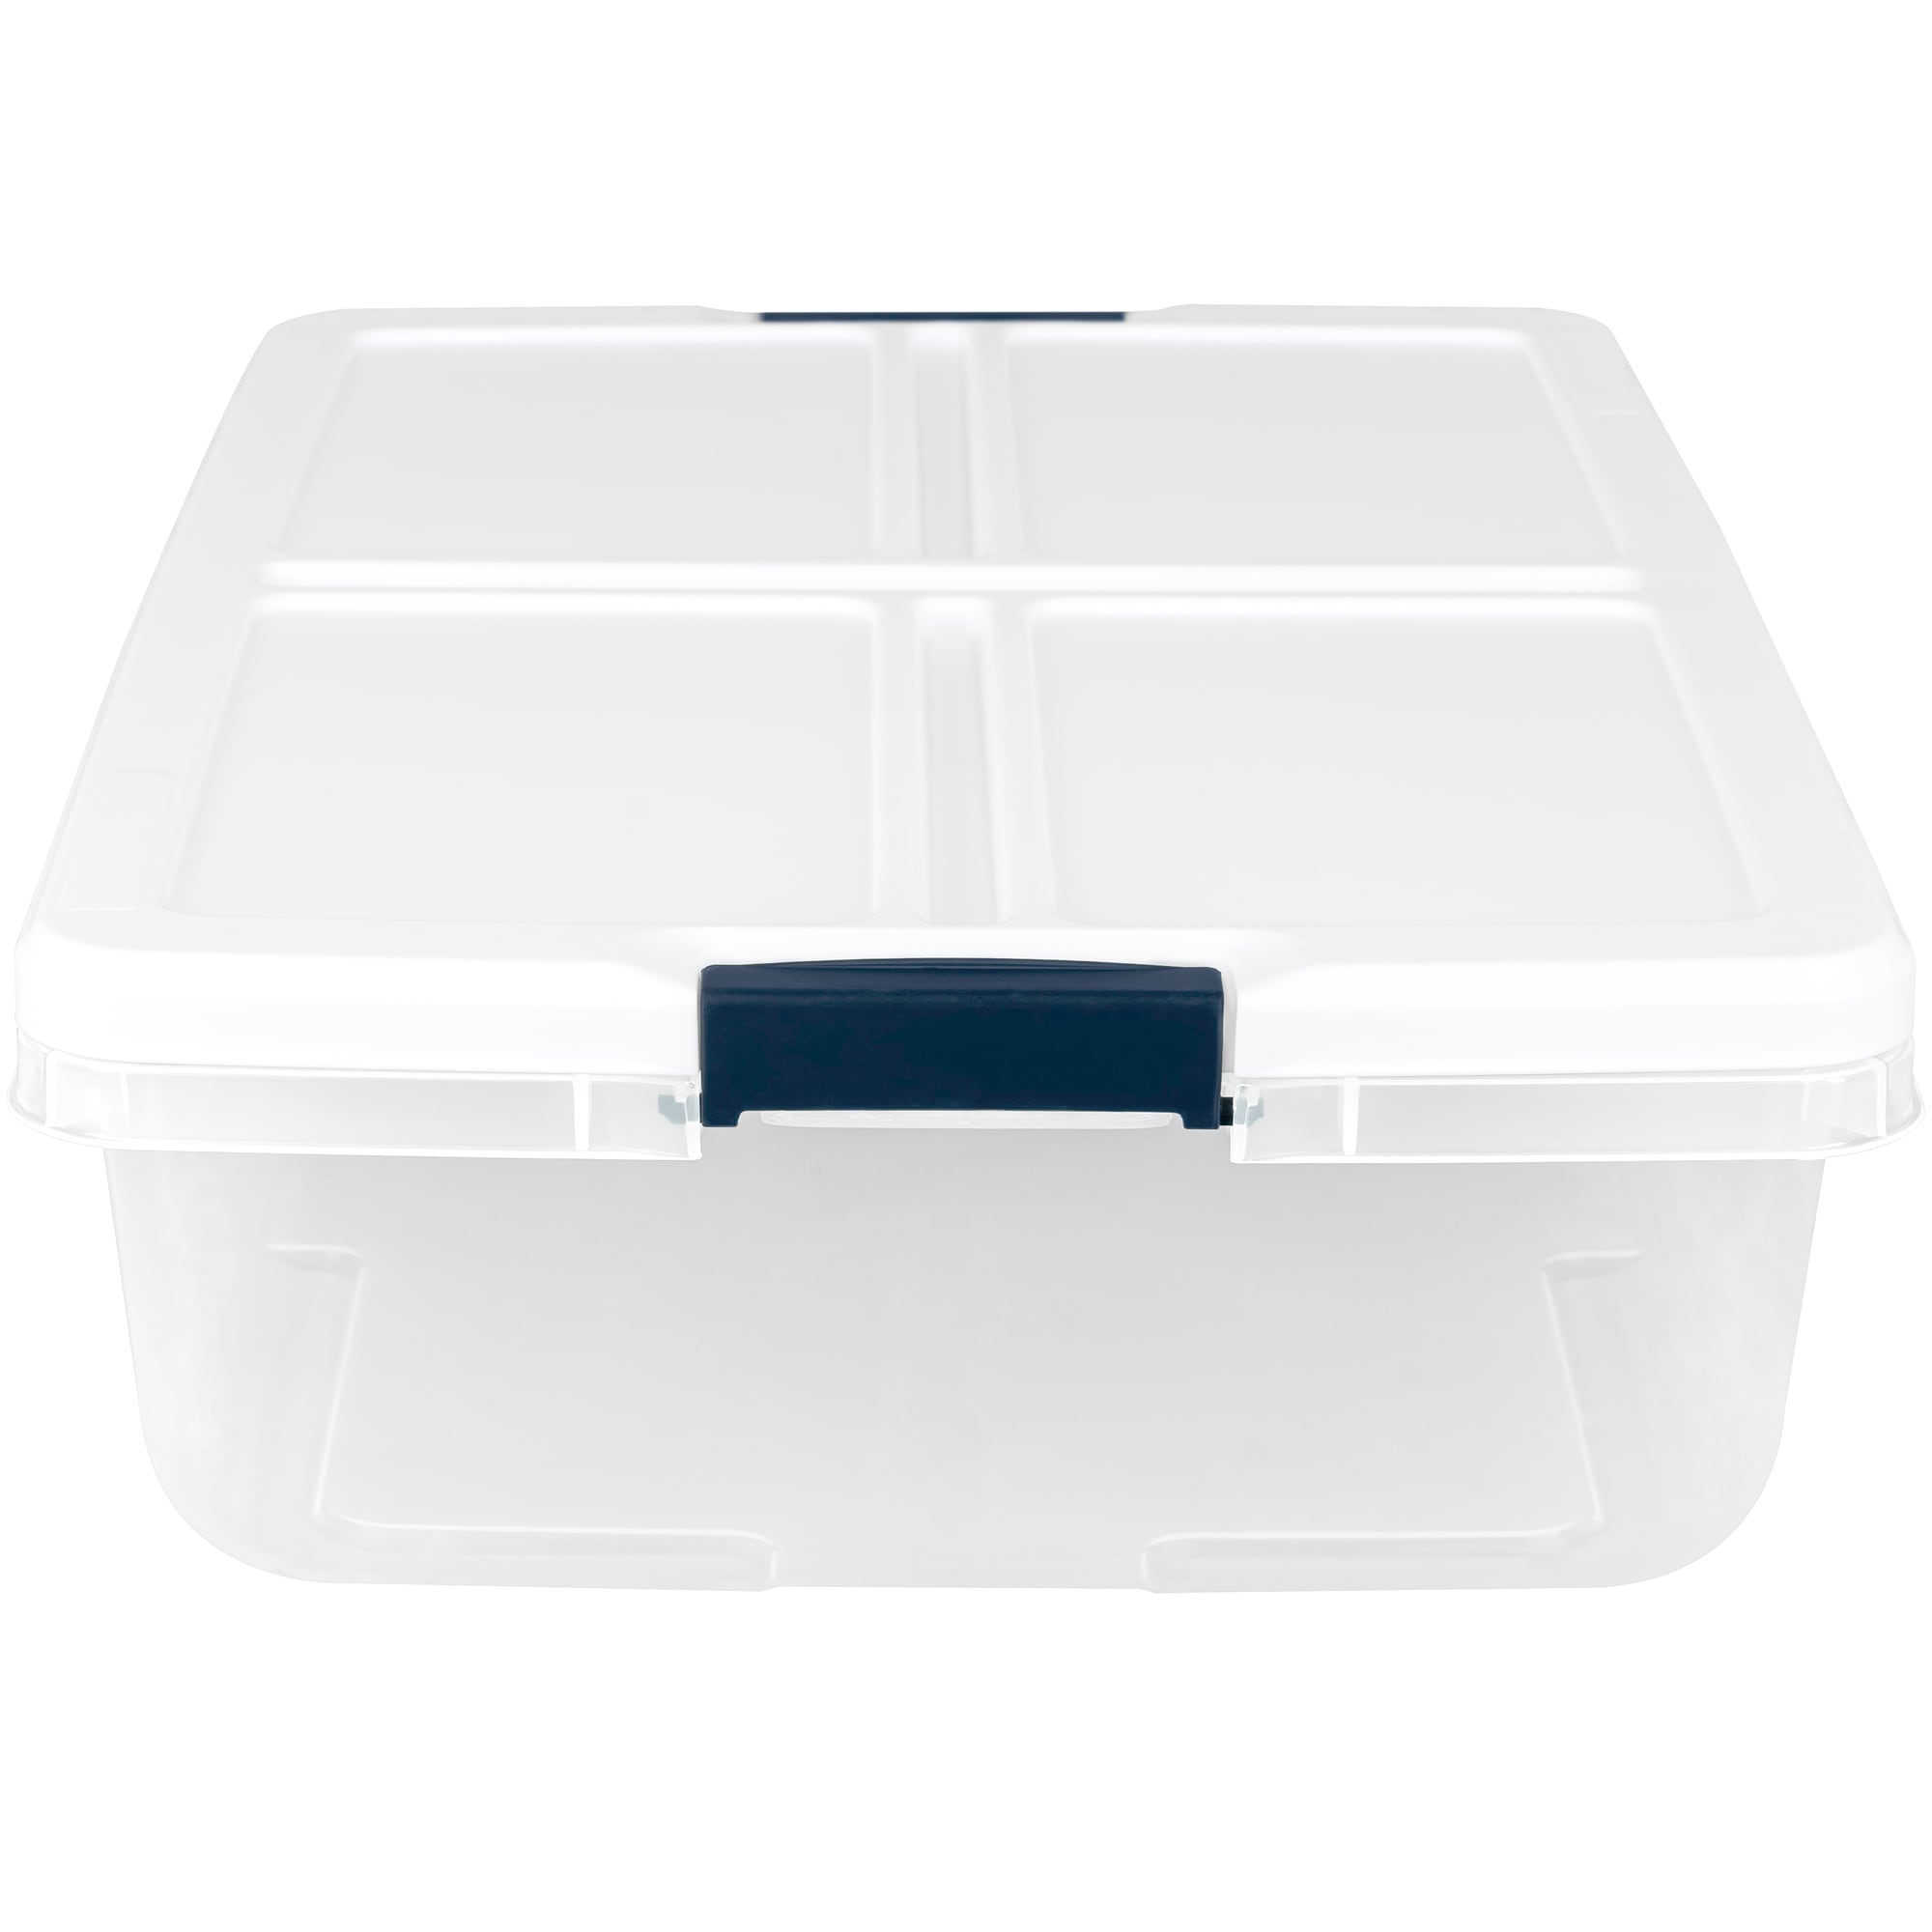 Project Source X-large 25-Gallons (100-Quart) Clear, White Tote